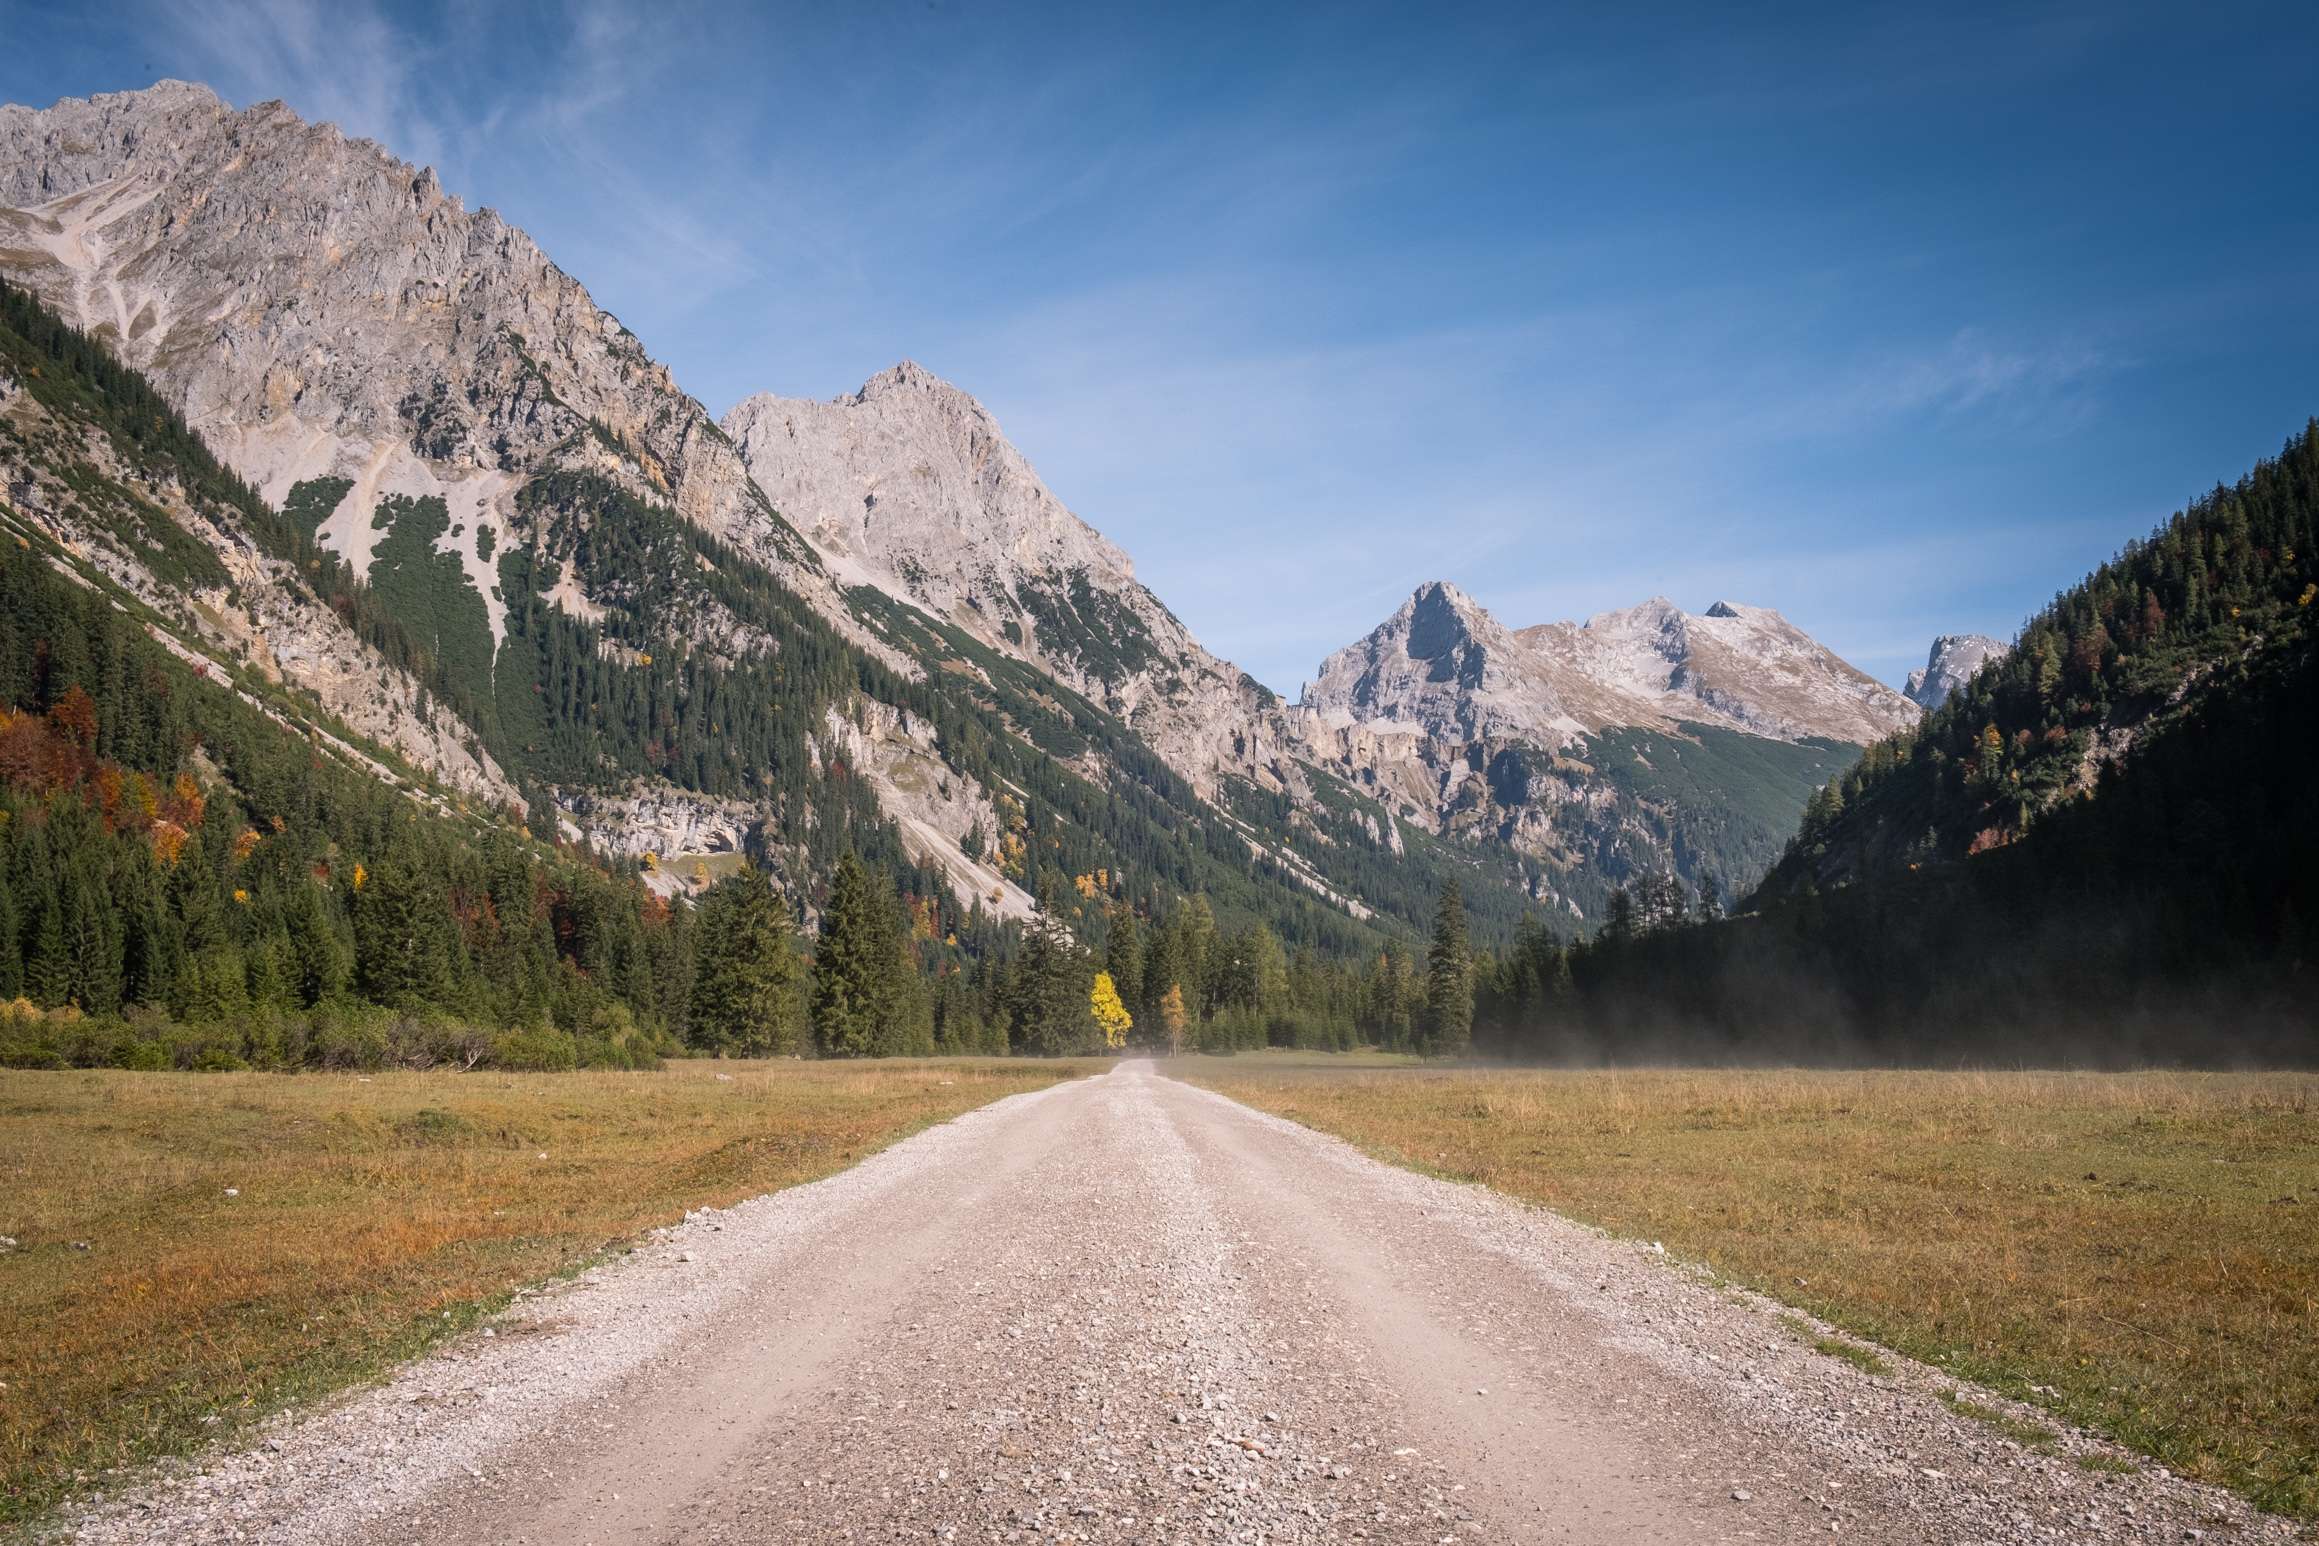 A dirt road running through an flat meadow in the Karwendel surrounded by massive mountains.